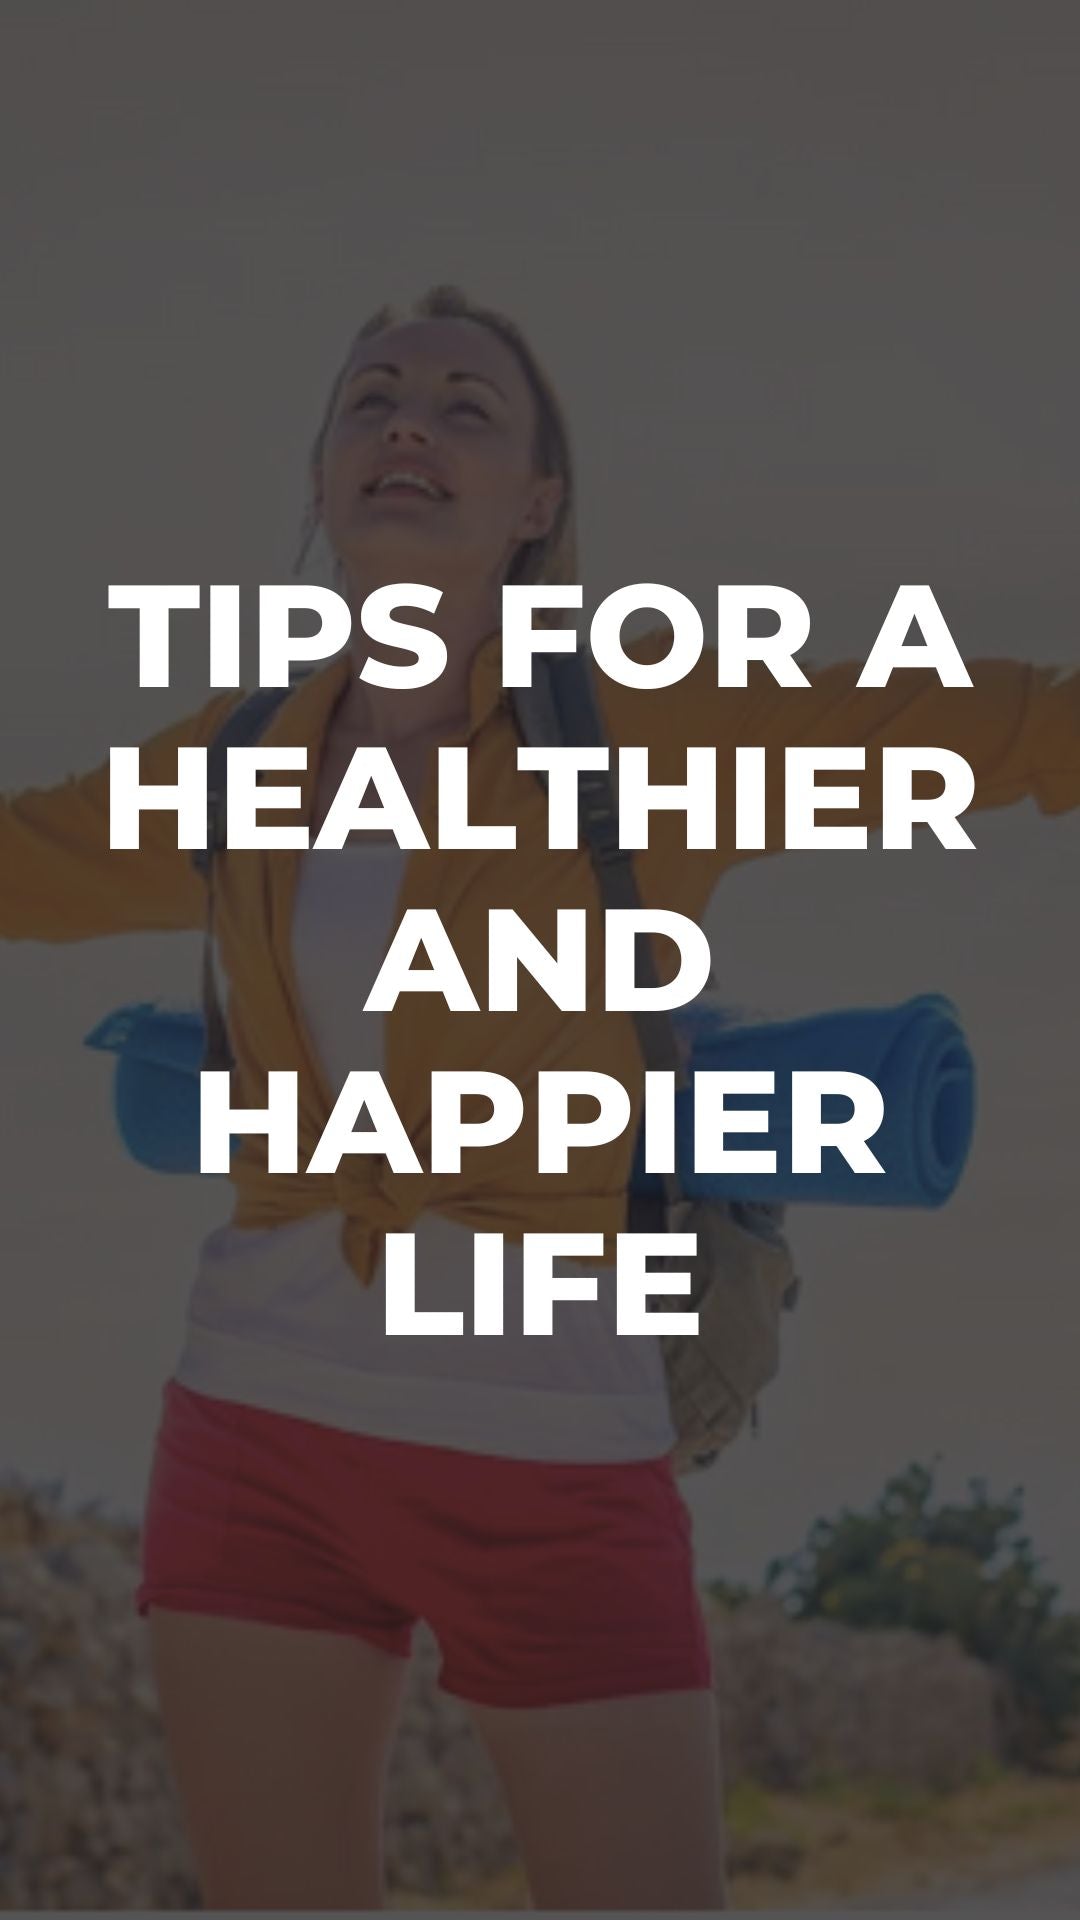 Tips For A Healthier And Happier Life